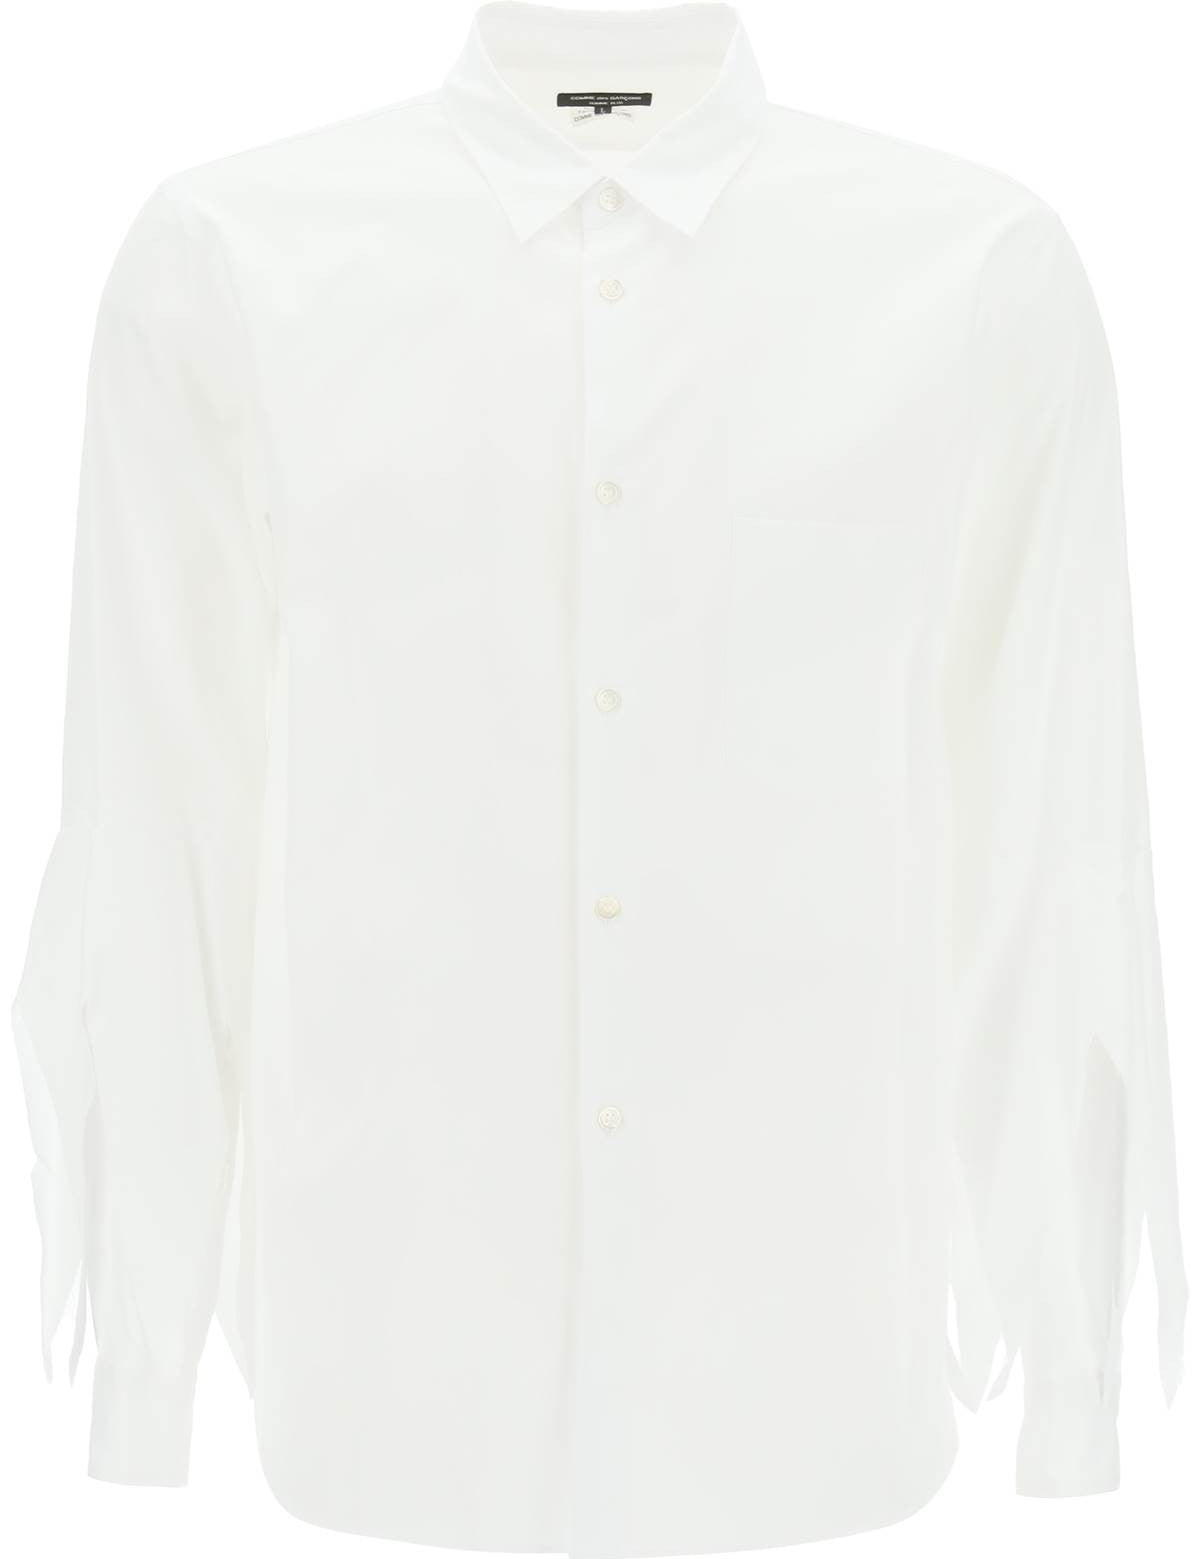 comme-des-garcons-homme-plus-spiked-frayed-sleeved-shirt.jpg